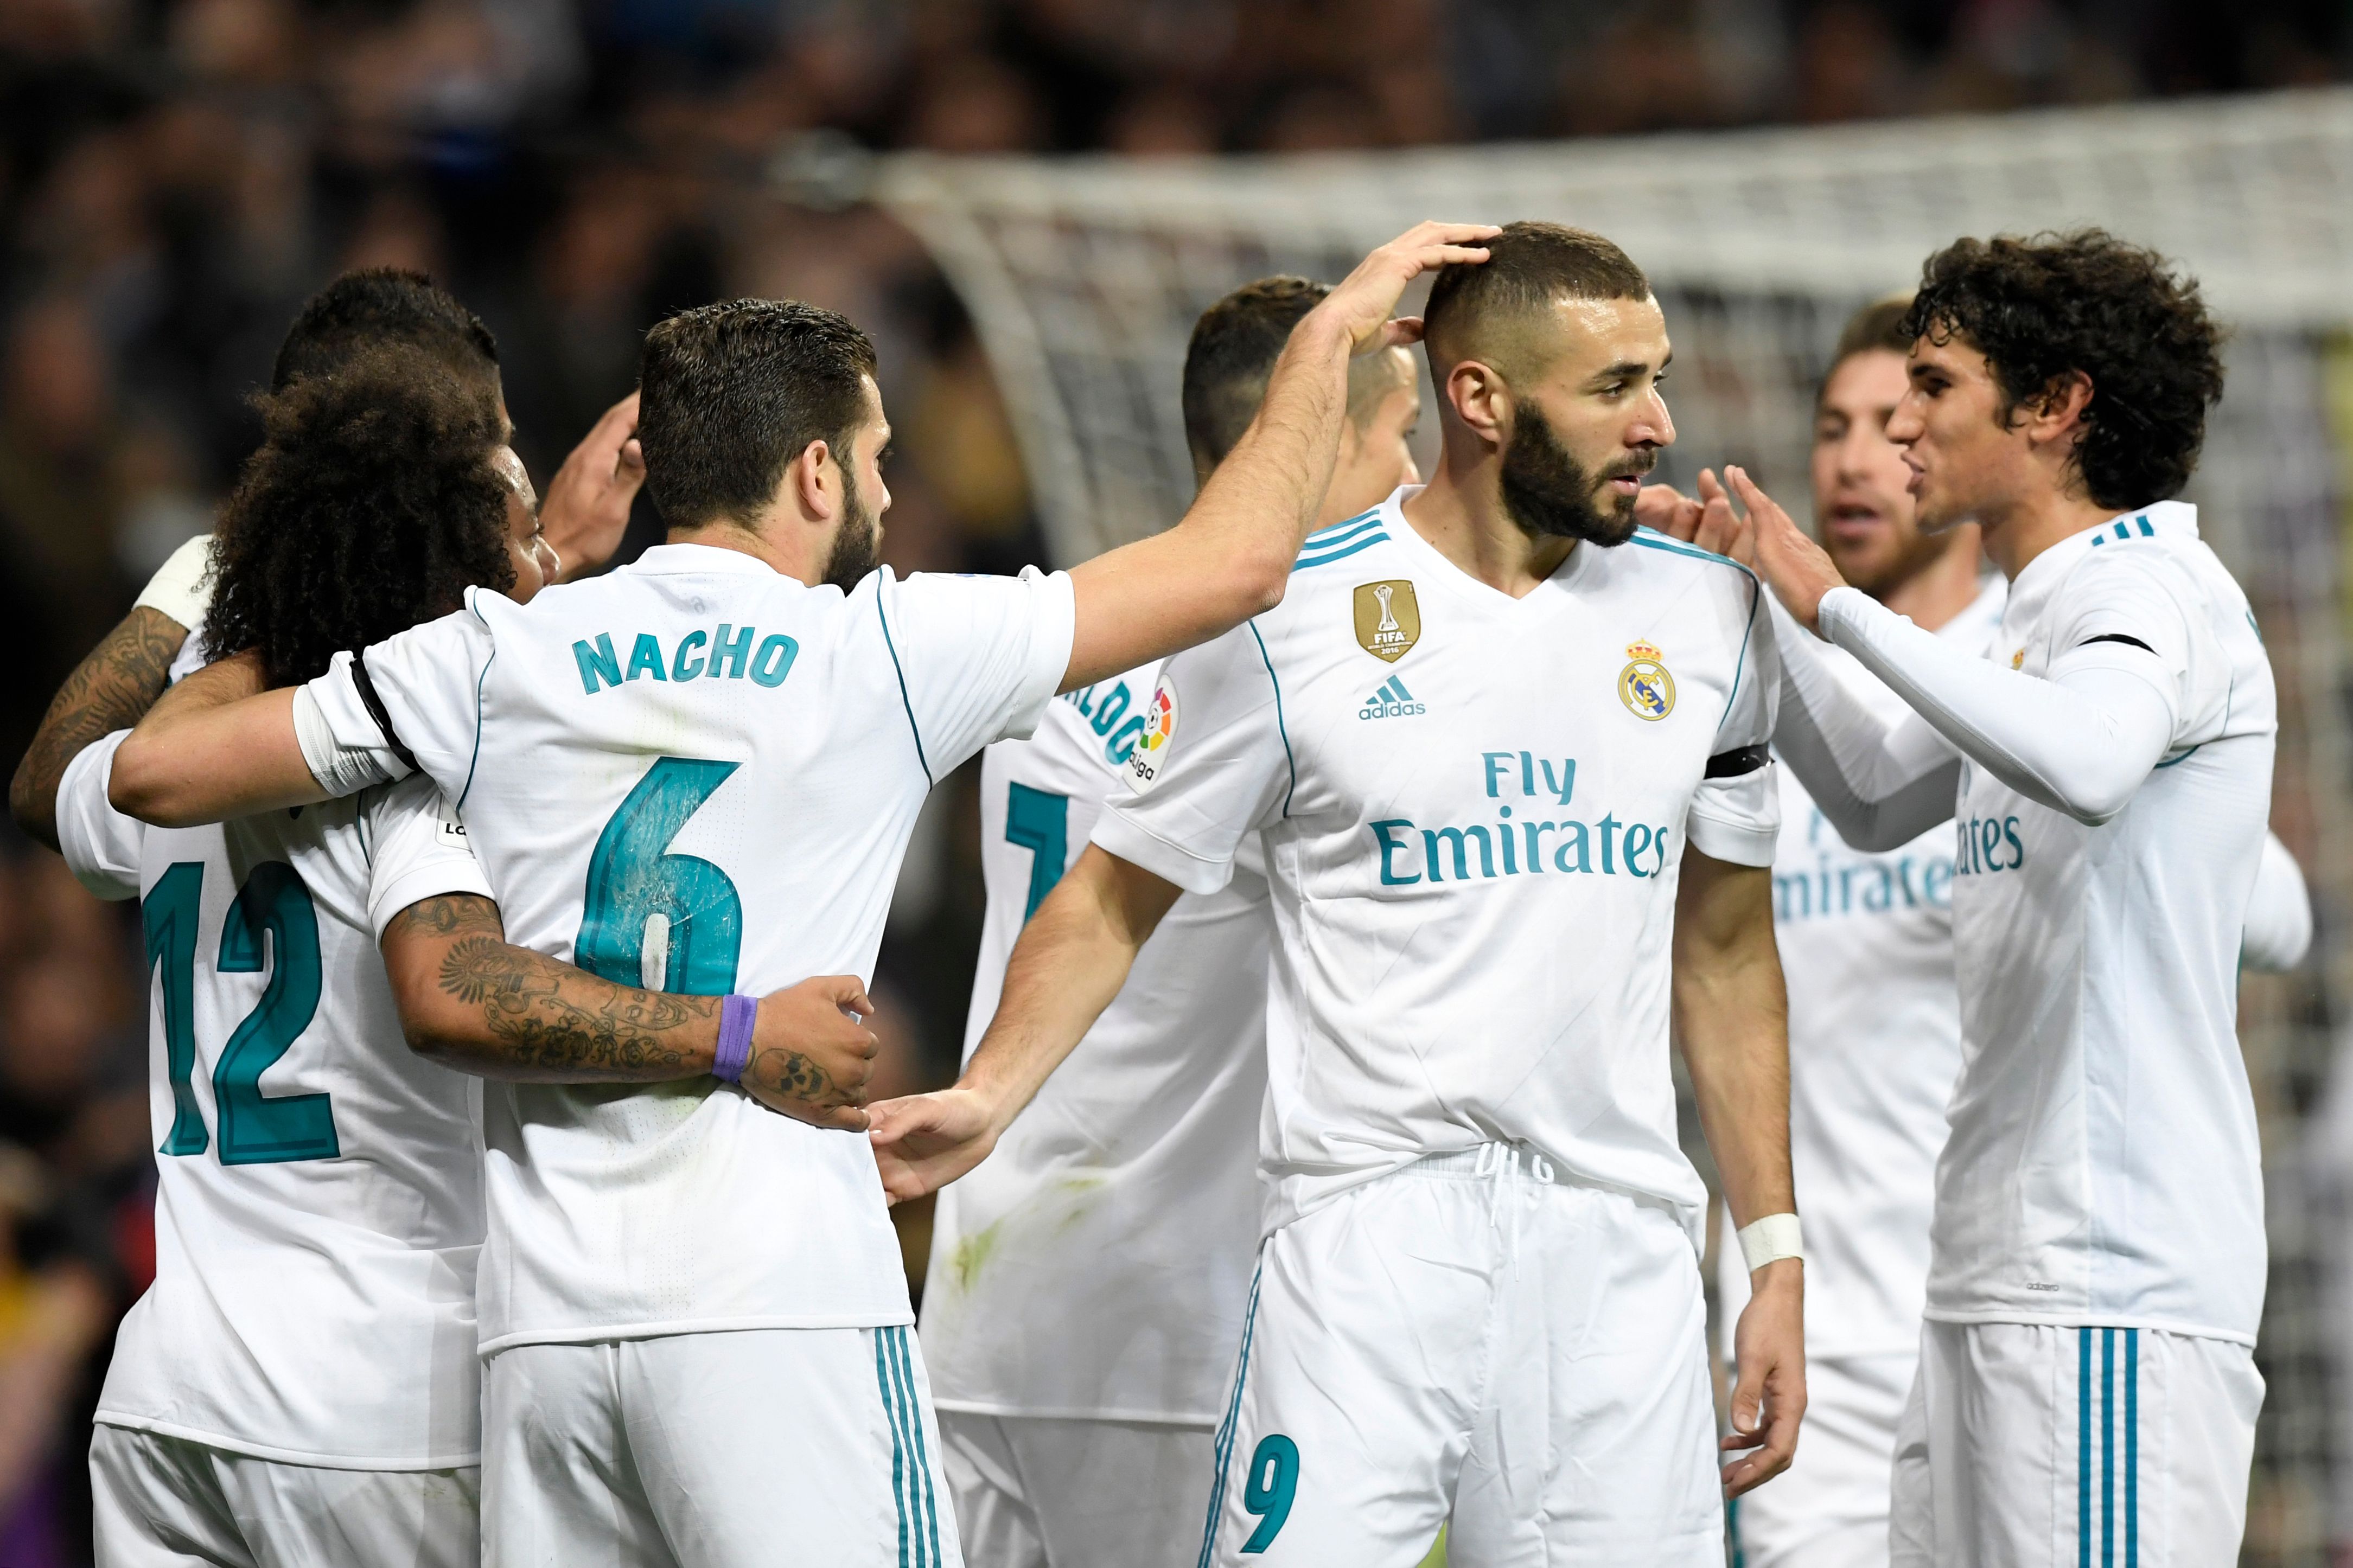 Real Madrid's players celebrate a goal during the Spanish league football match Real Madrid CF vs UD Las Palmas at the Santiago Bernabeu stadium in Madrid on November 5, 2017. / AFP PHOTO / GABRIEL BOUYS        (Photo credit should read GABRIEL BOUYS/AFP/Getty Images)